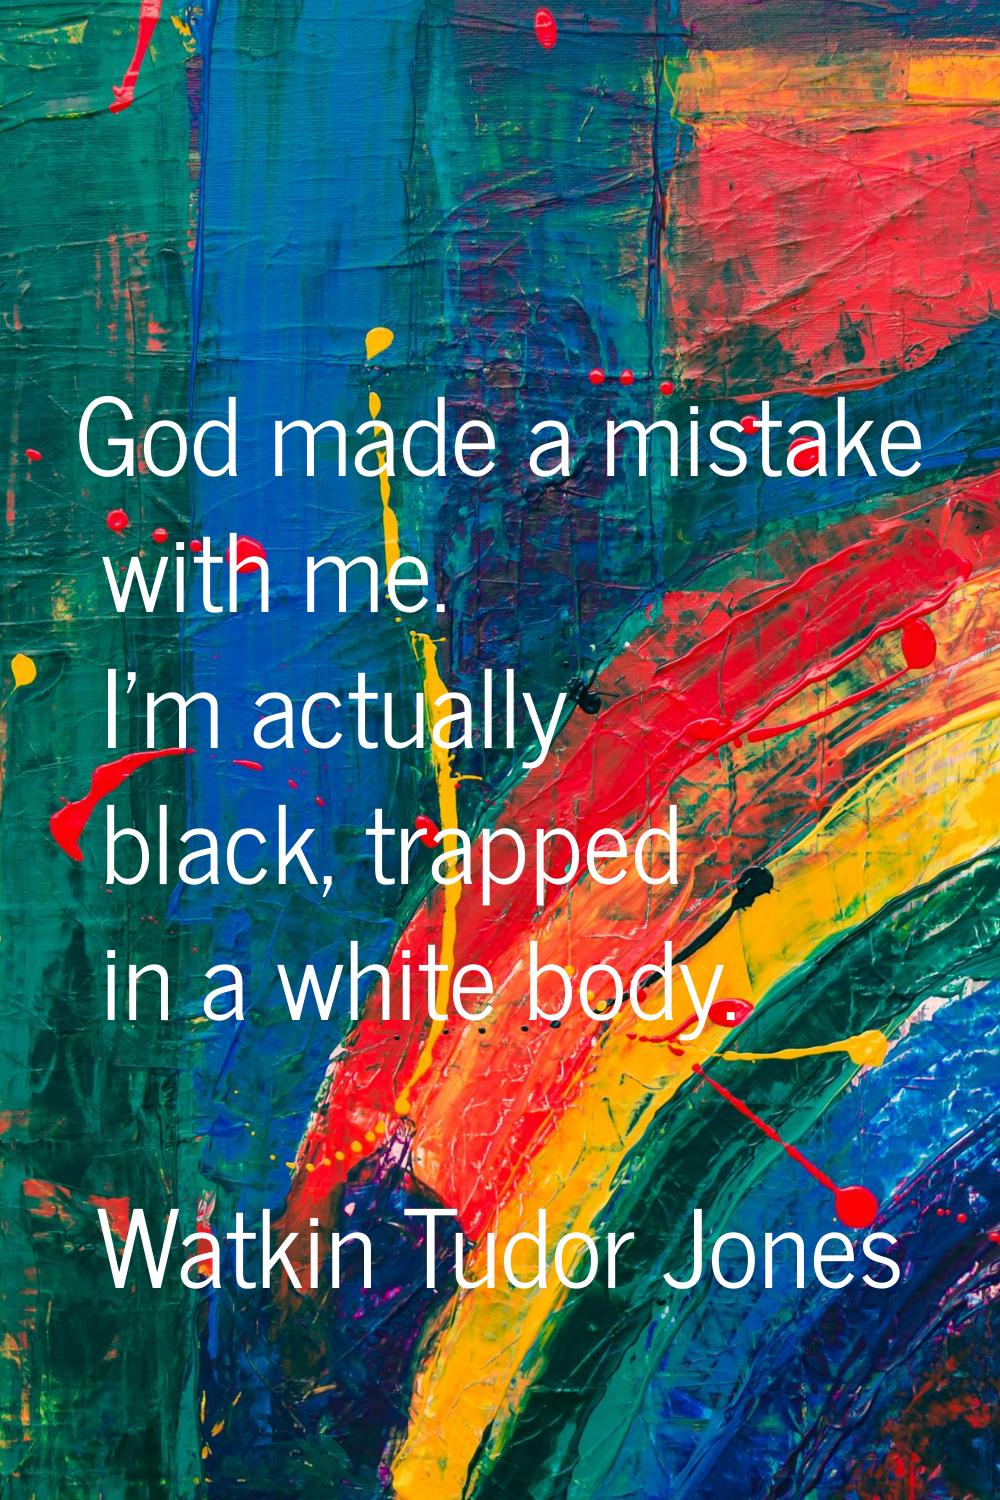 God made a mistake with me. I'm actually black, trapped in a white body.